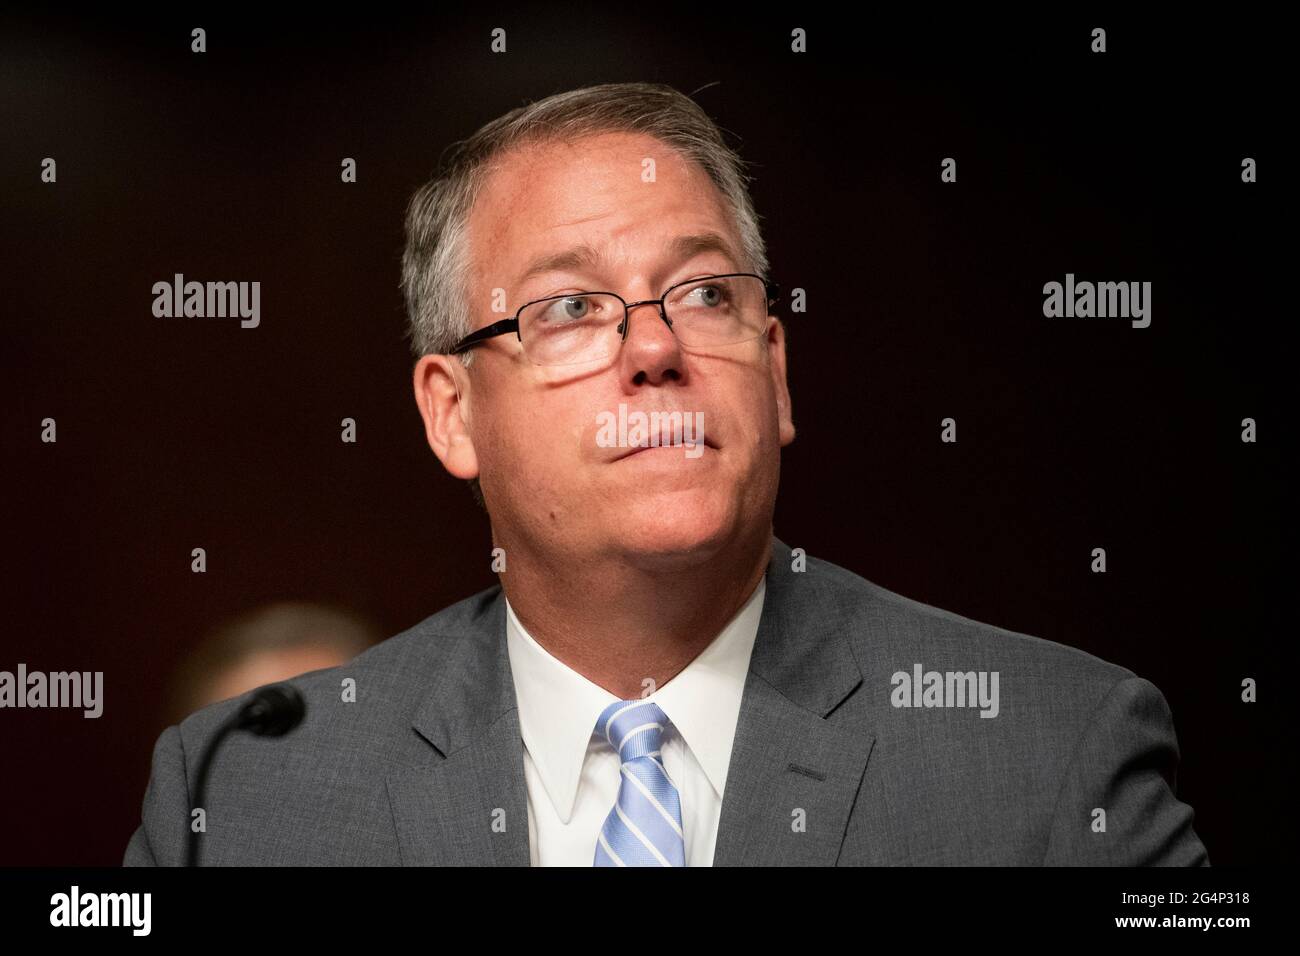 Washington, United States Of America. 22nd June, 2021. Thomas Harker, Acting Secretary of the Navy, appears before a Senate Committee on Armed Services hearing to examine the posture of the Department of the Navy in review of the Defense Authorization Request for fiscal year 2022 and the Future Years Defense Program, in the Dirksen Senate Office Building in Washington, DC, Tuesday, June 22, 2021. Credit: Rod Lamkey/CNP/Sipa USA Credit: Sipa USA/Alamy Live News Stock Photo